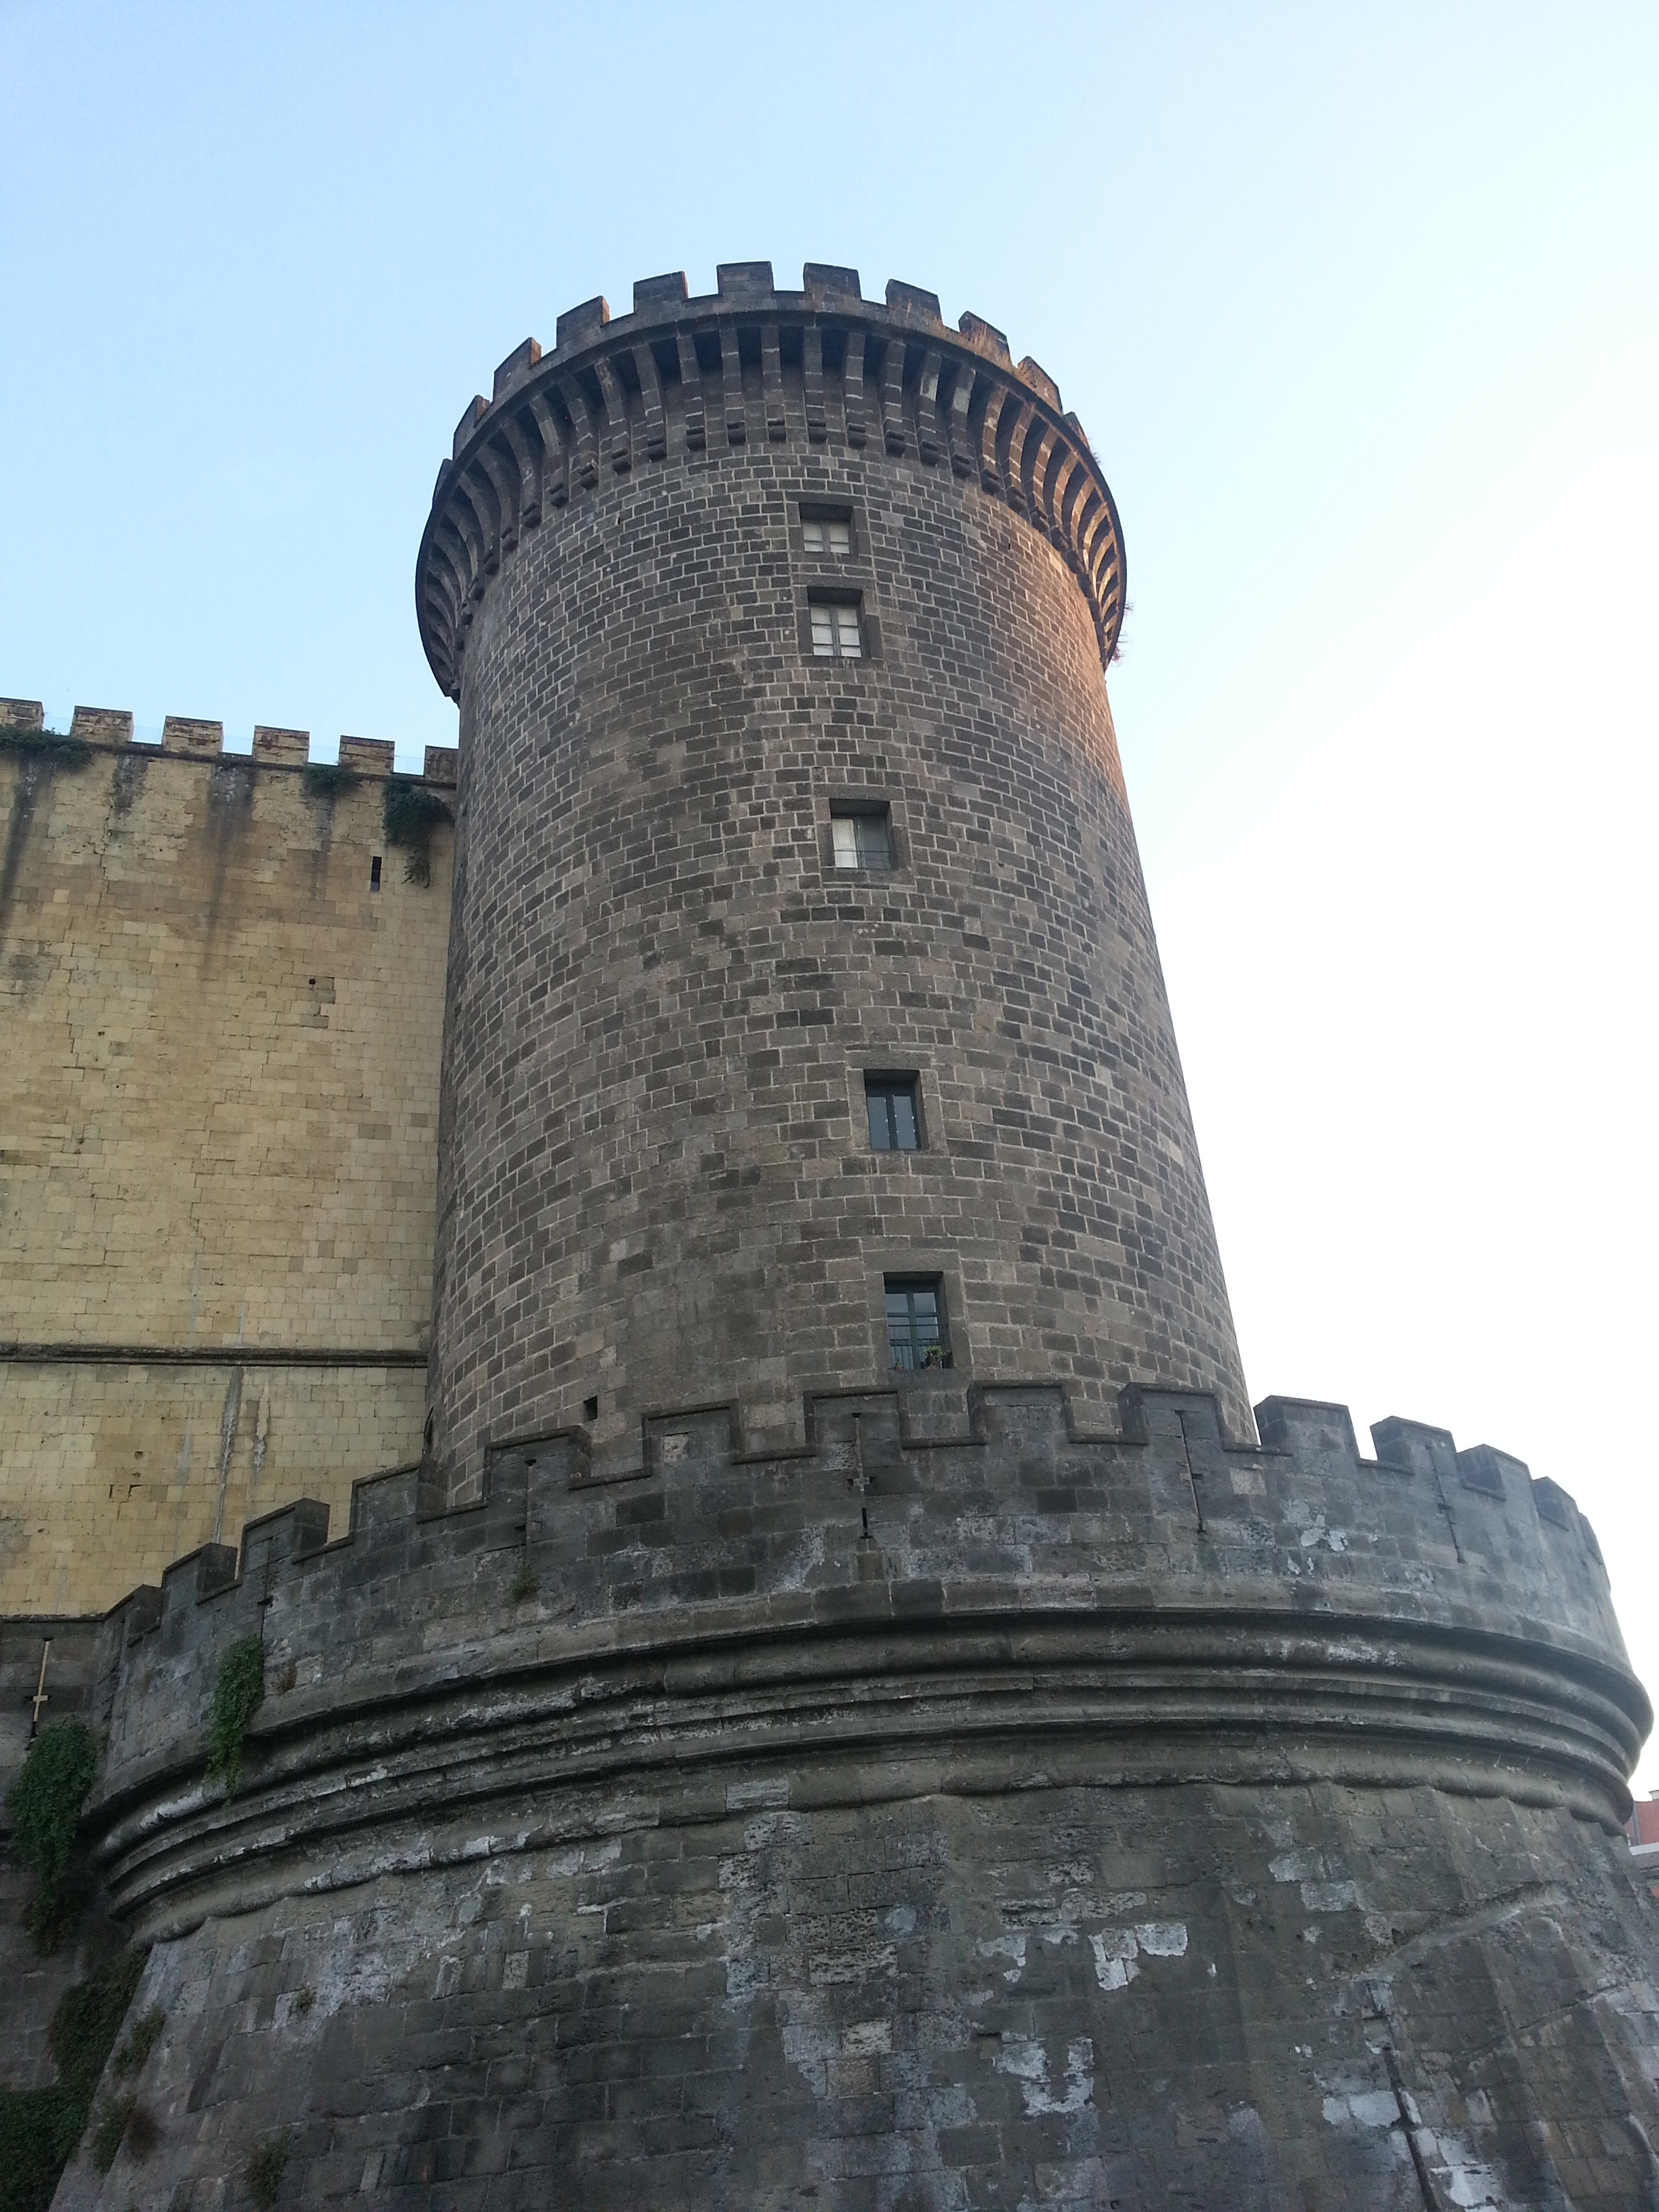 Fortifications of the Castelnuovo, Naples. My photograph (September 2012).